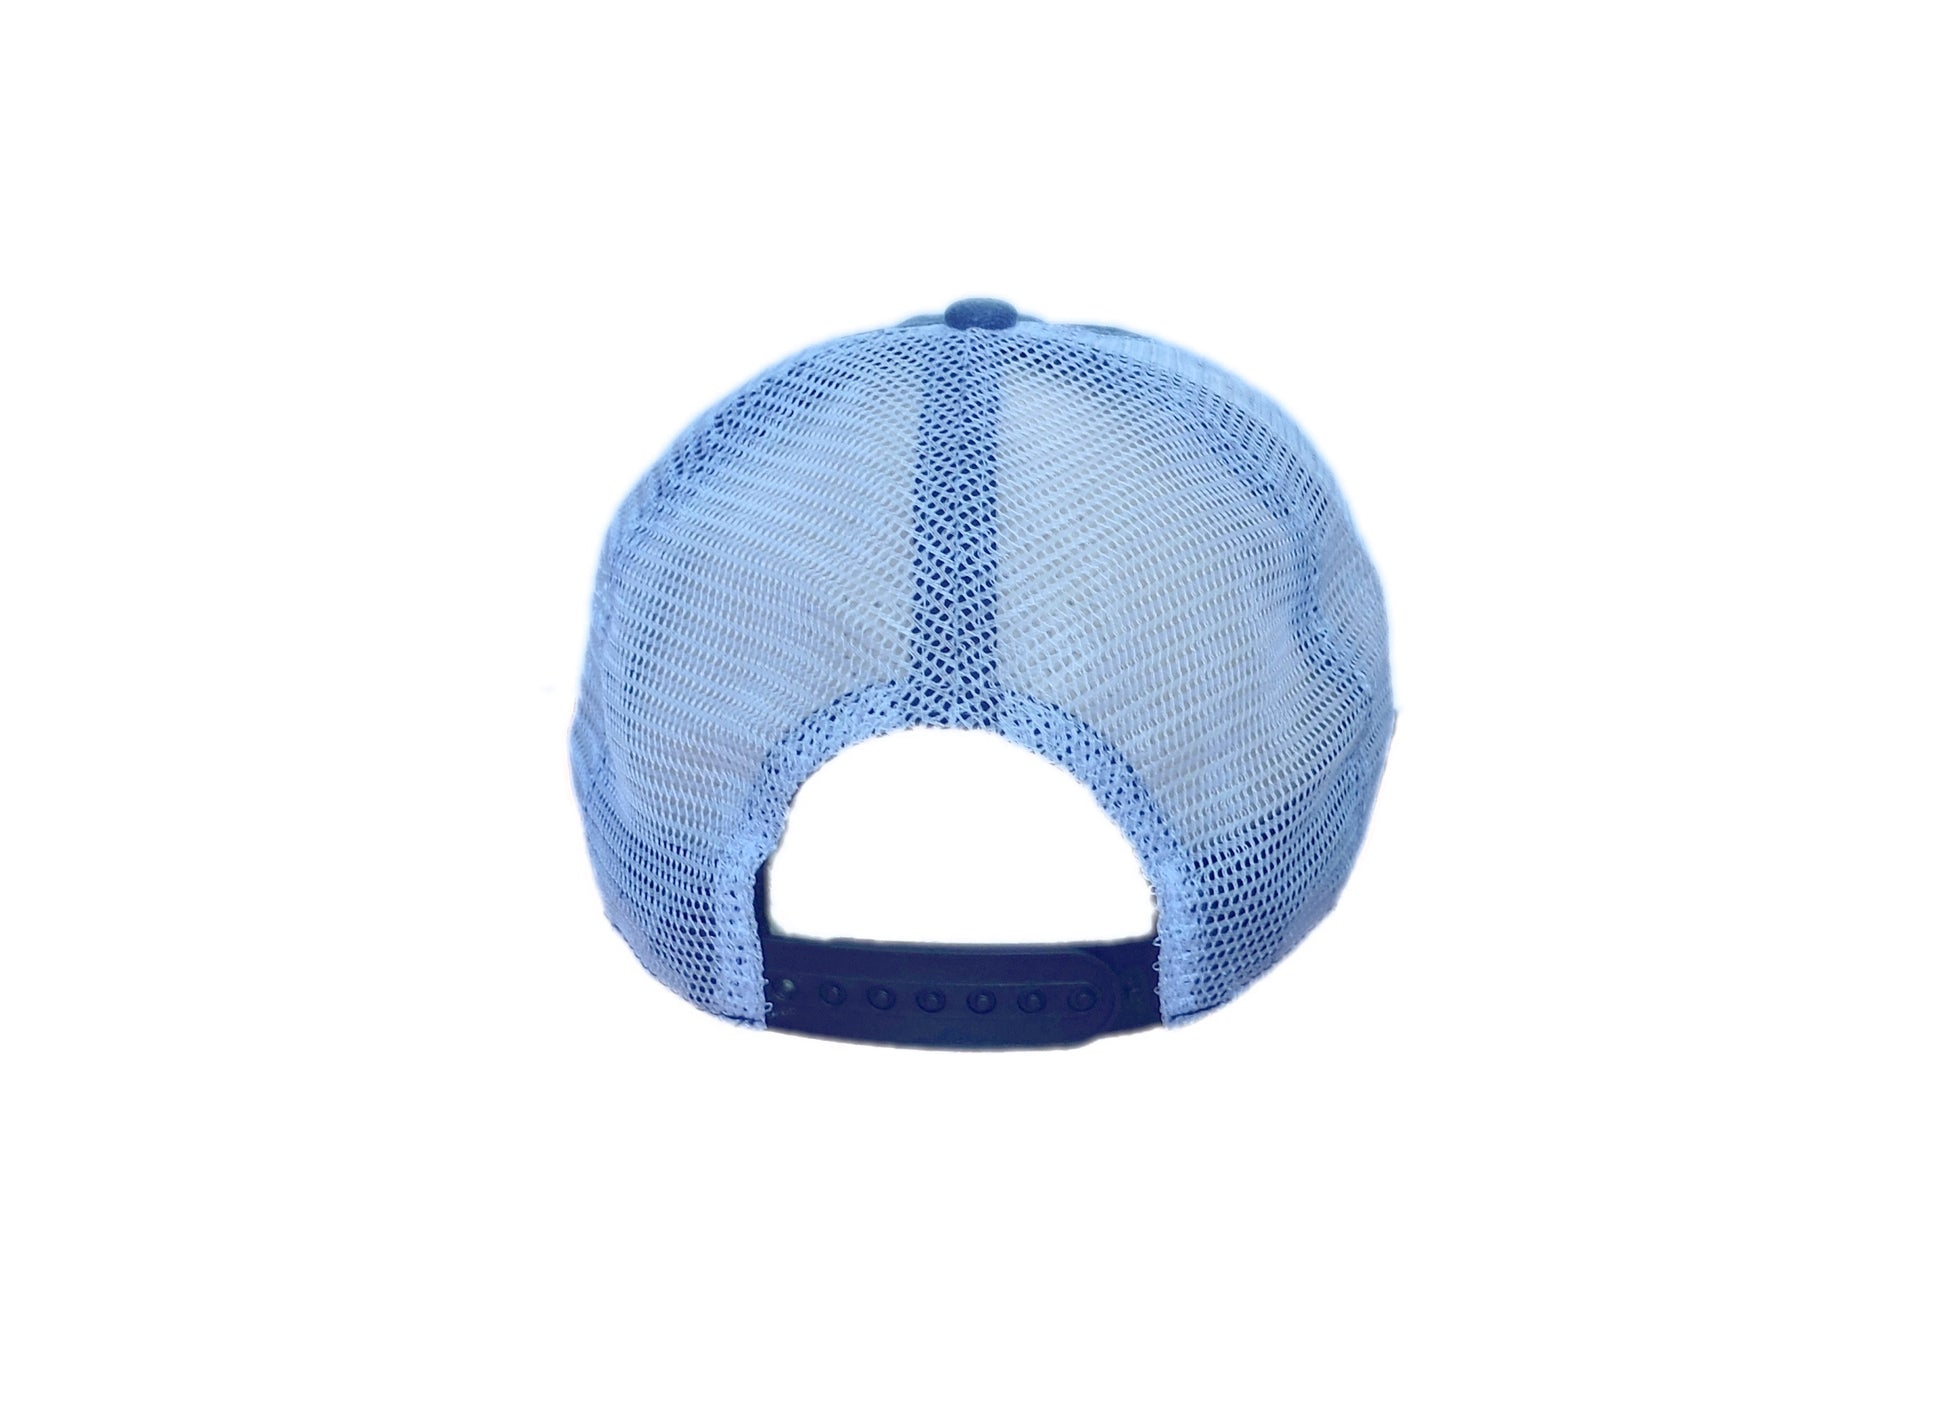 Navy blue and white Angler trucker cap back side view